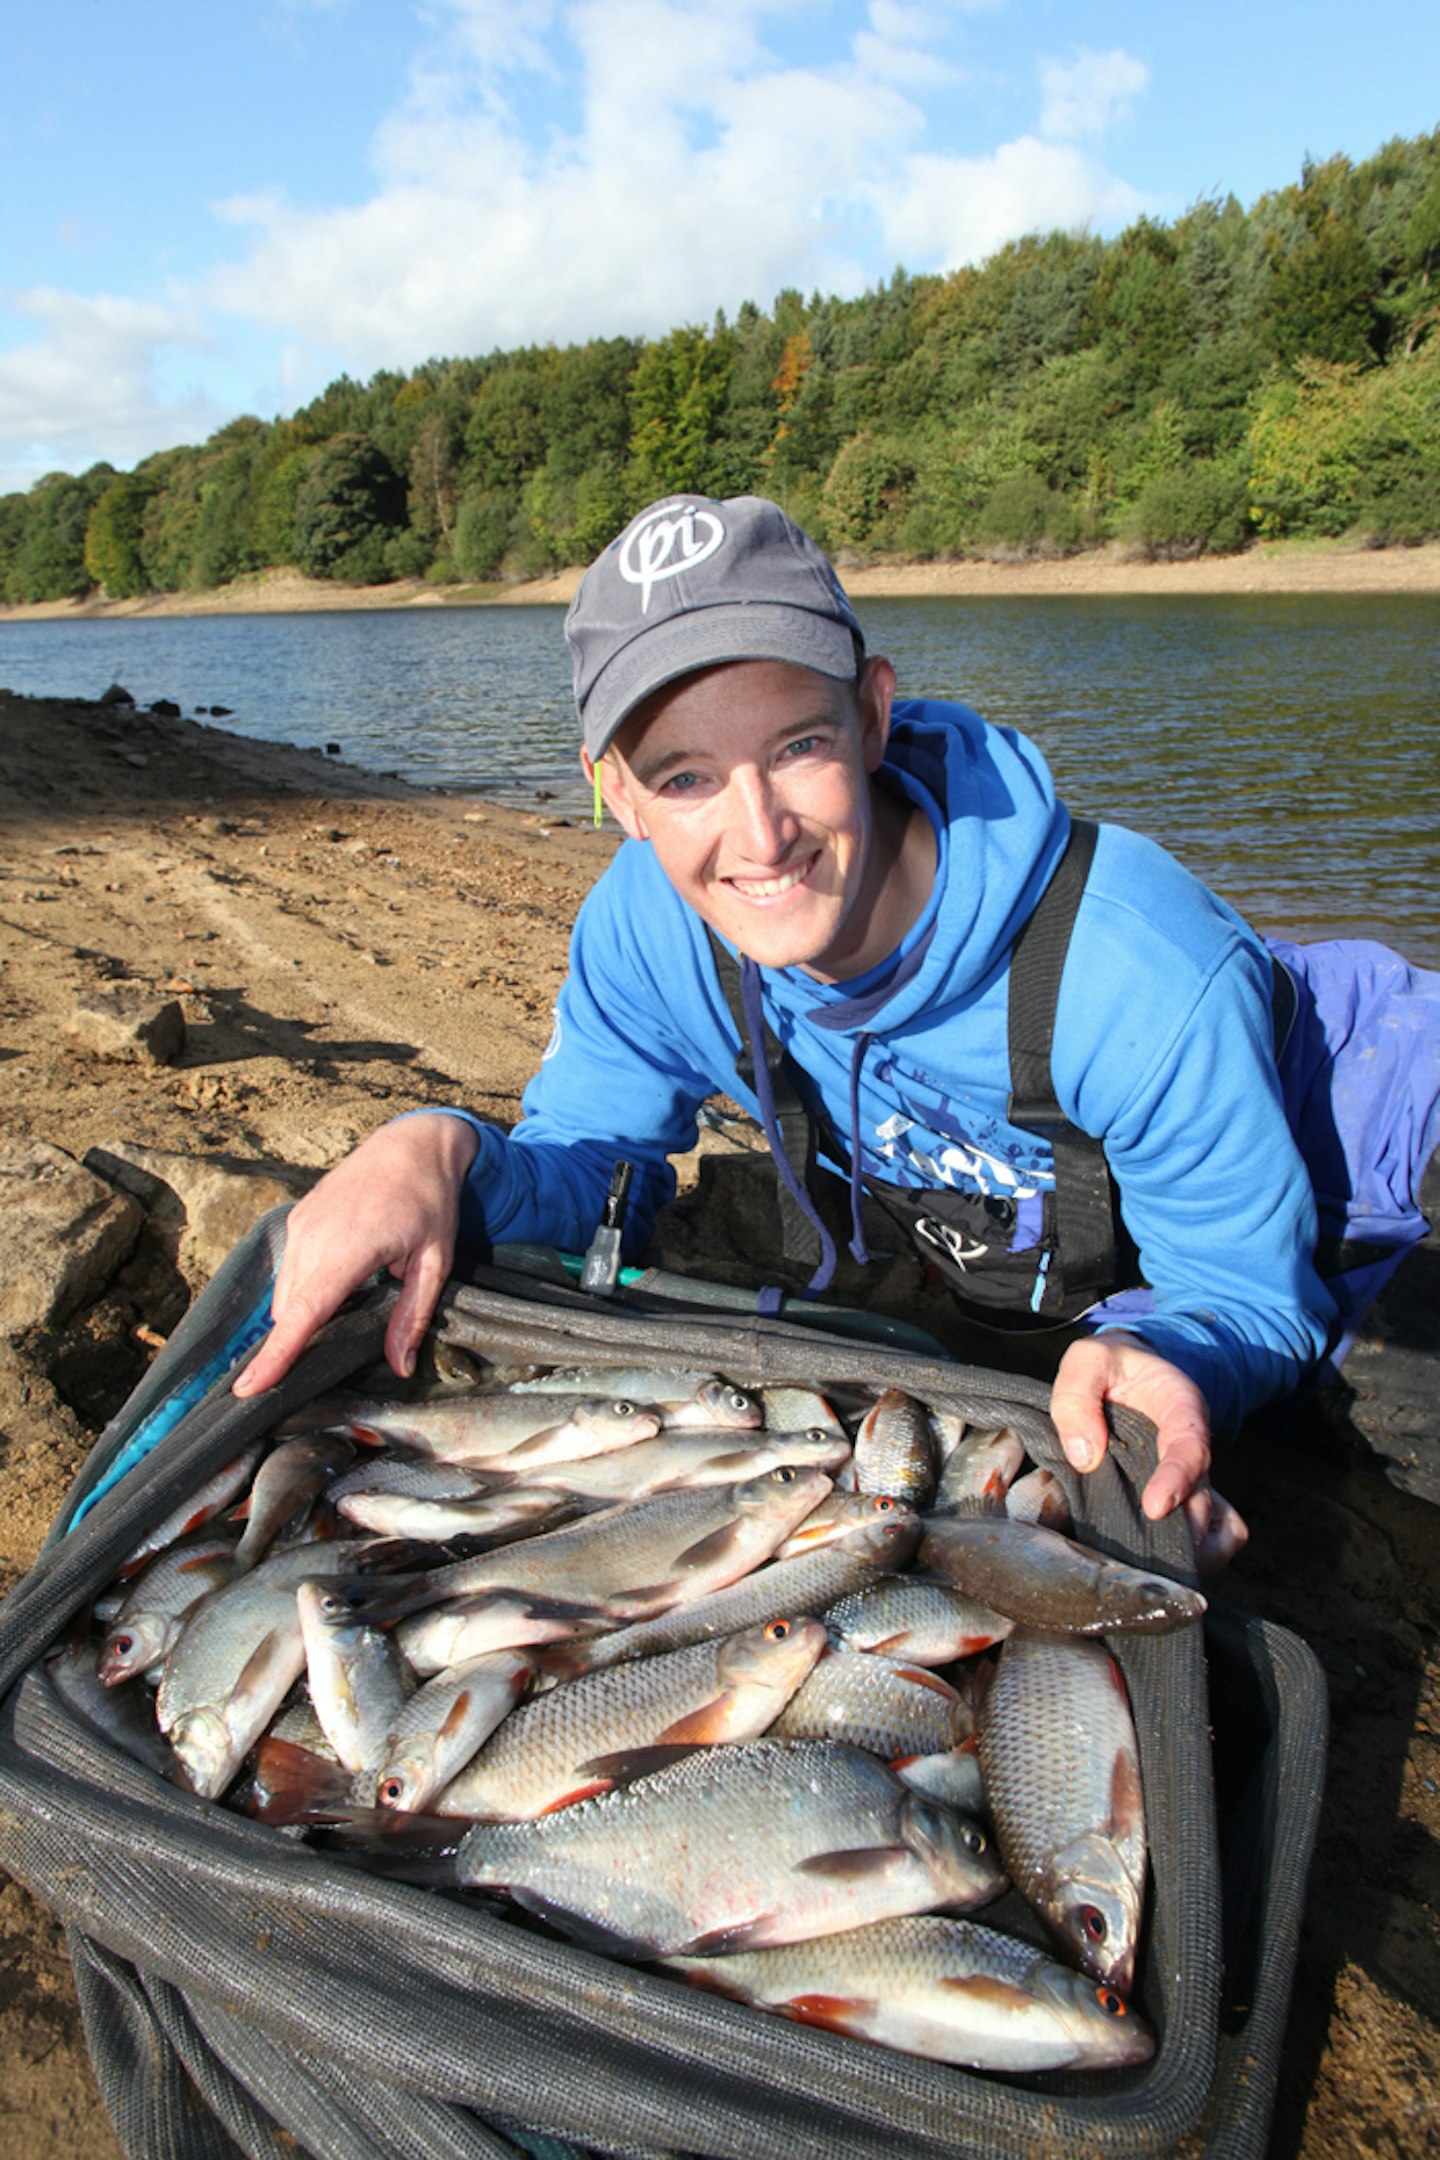 A fine net of silvers for Lee on his first visit to Damflask. 